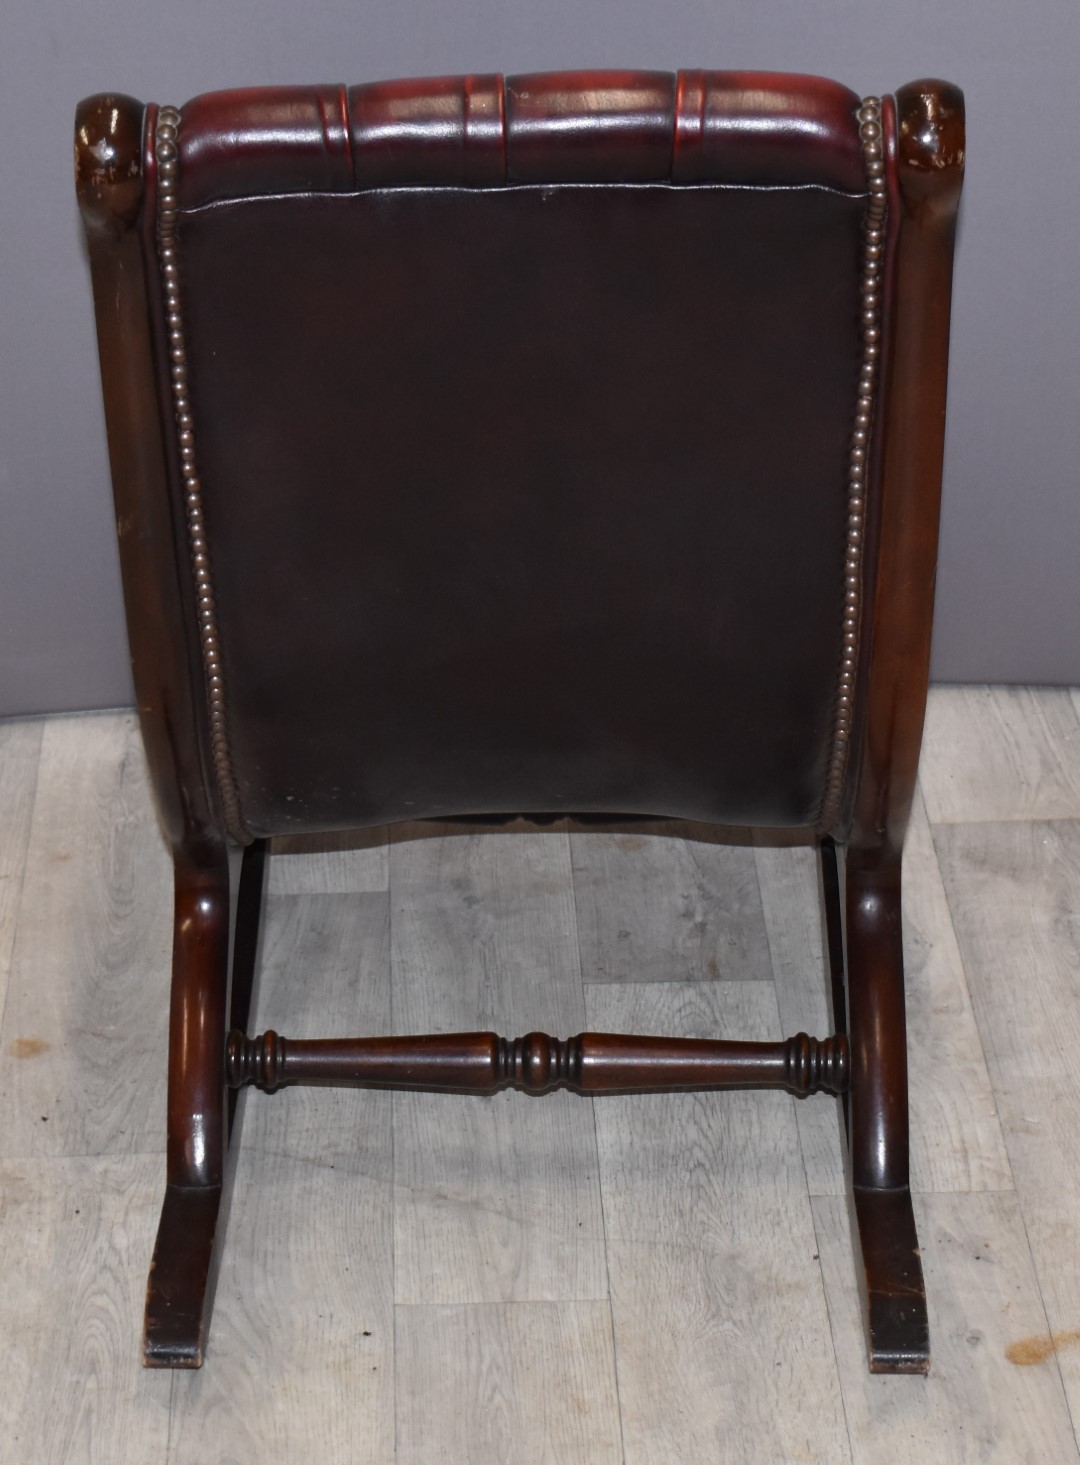 Leather Chesterfield rocking nursing chair - Image 2 of 2